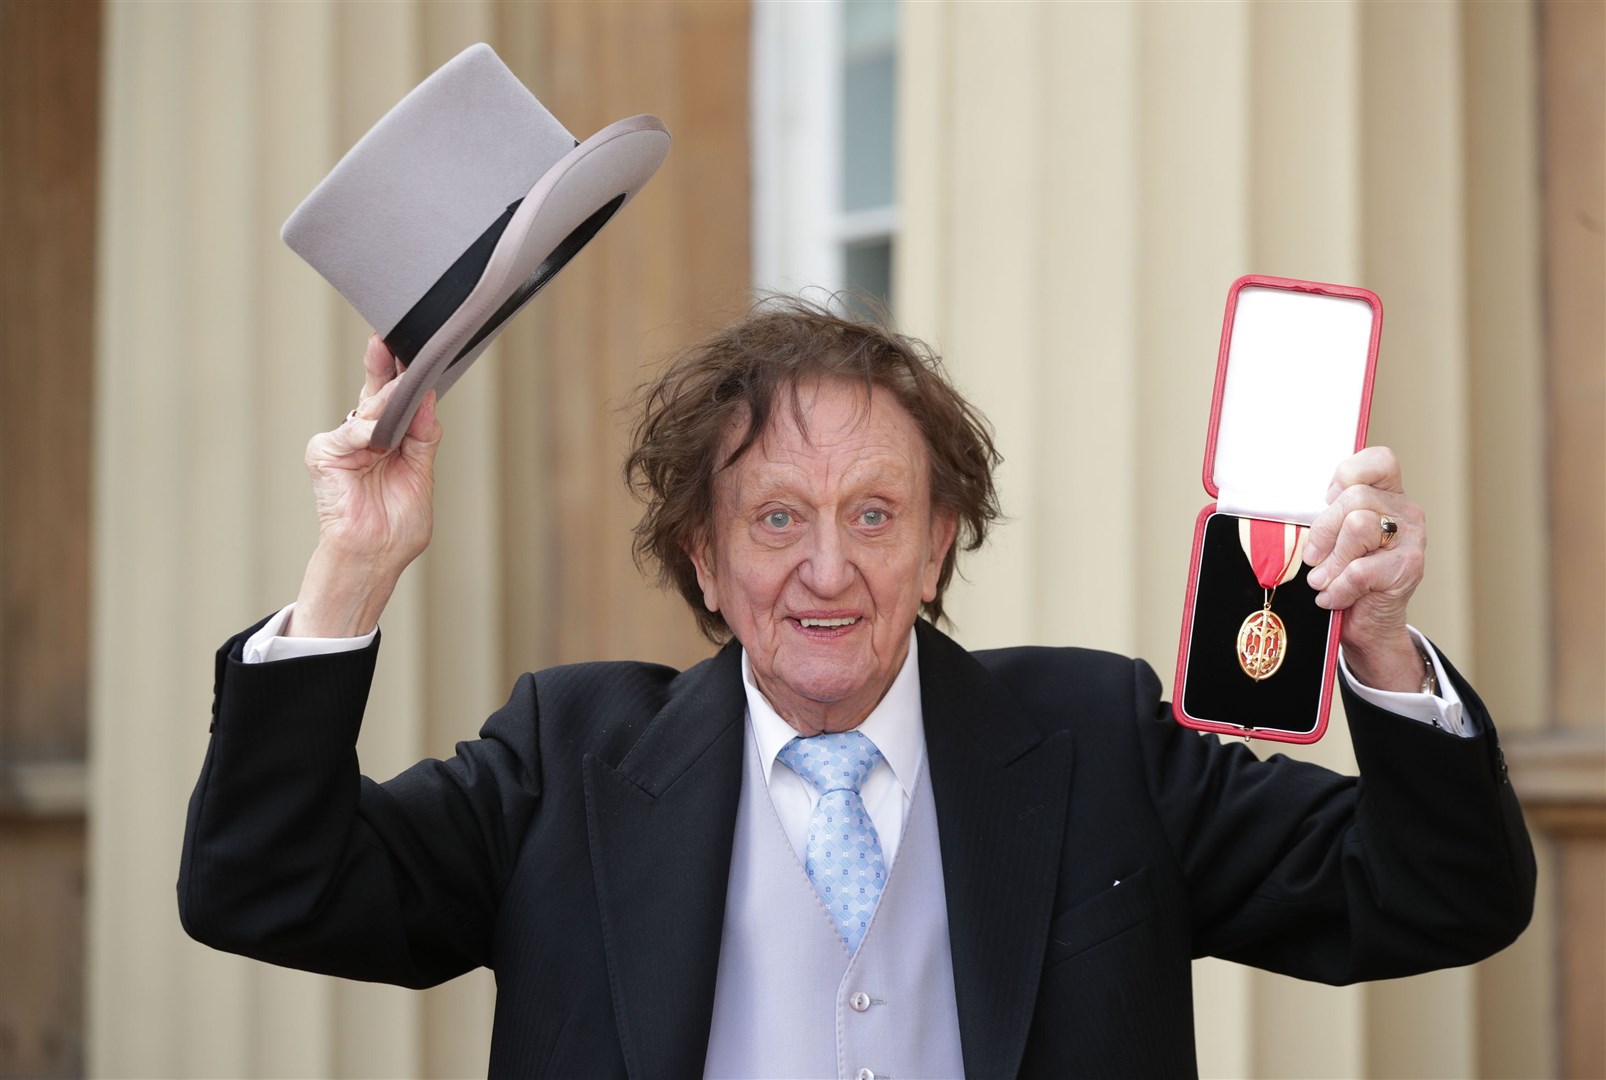 Veteran entertainer Sir Ken Dodd at Buckingham Palace, London, after he was made a Knight Bachelor of the British Empire by the Duke of Cambridge (Yui Mok/PA)